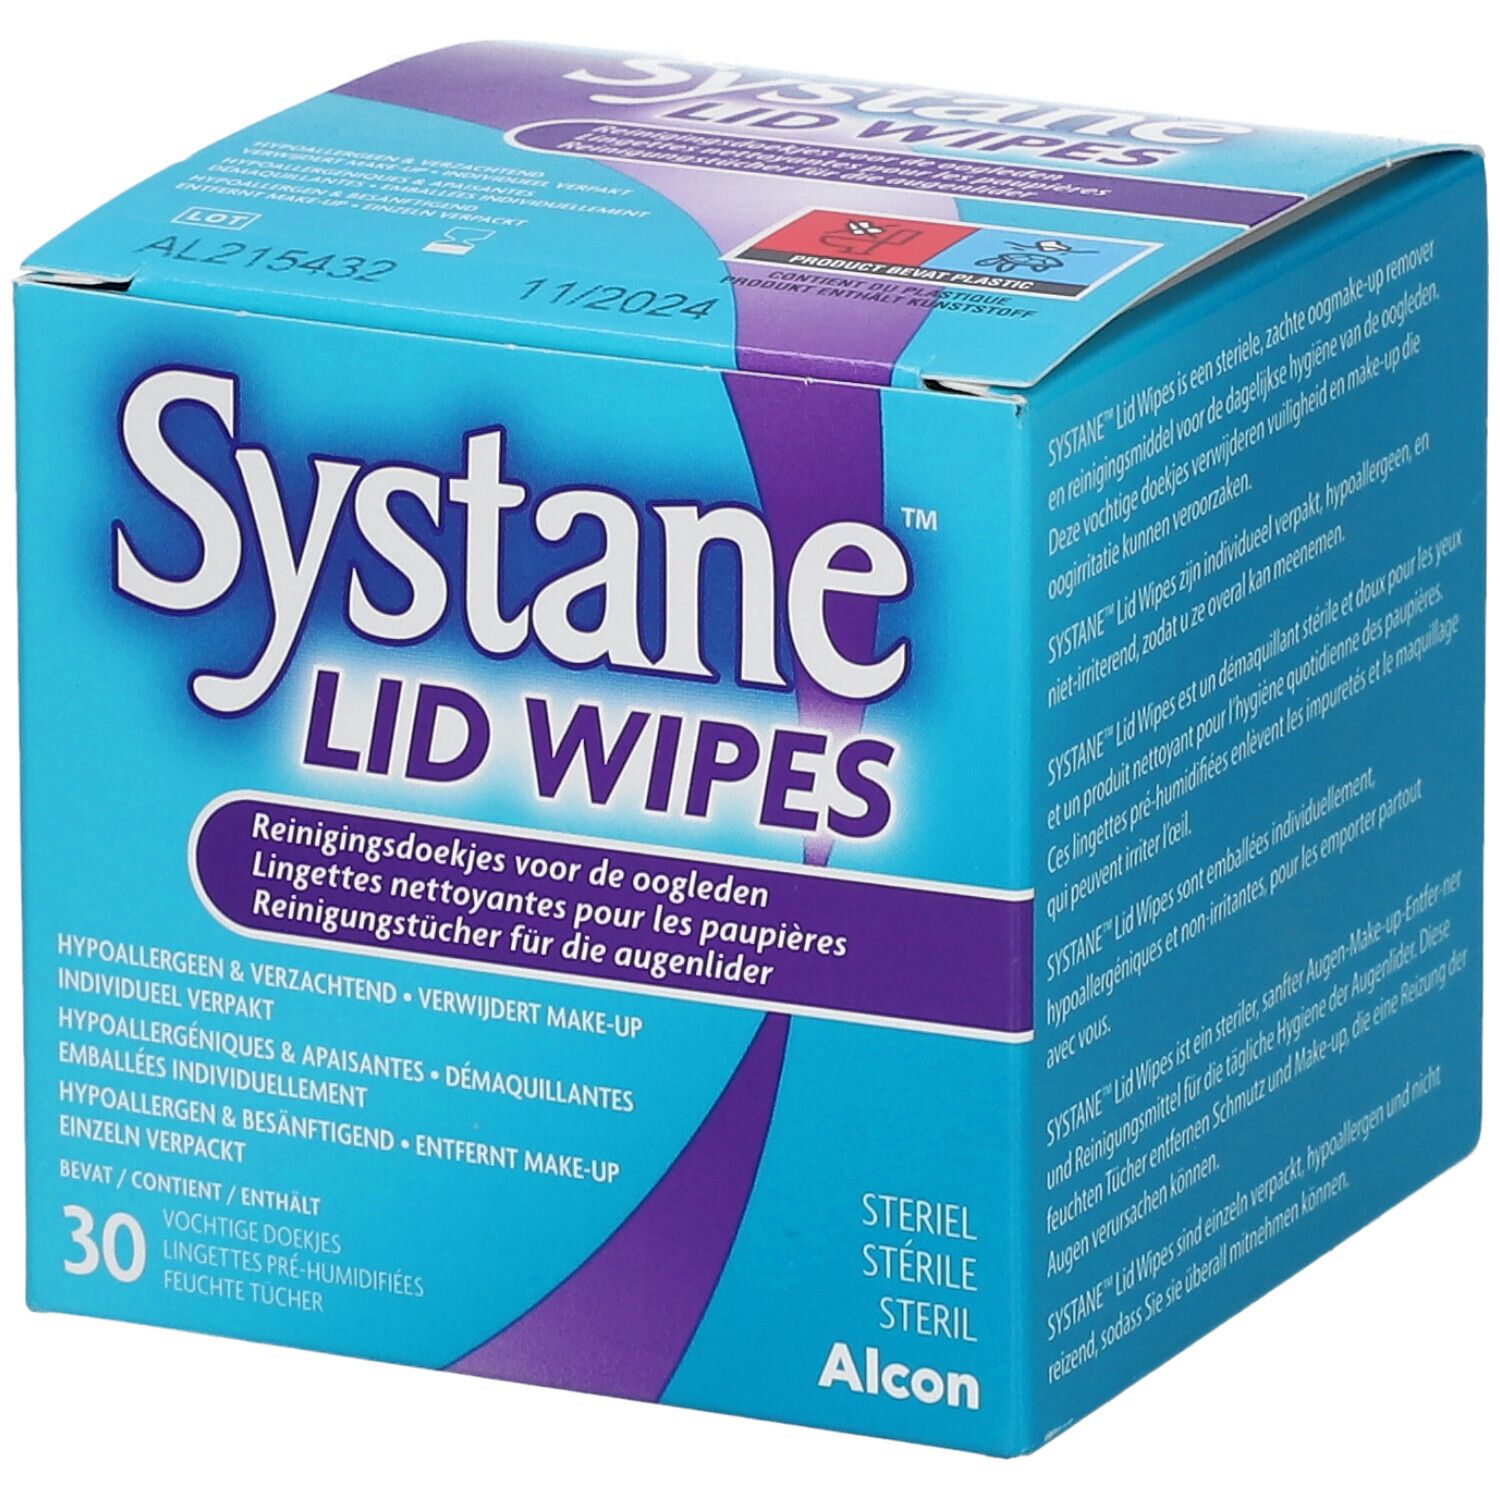 Systane® Lid Wipes Steril